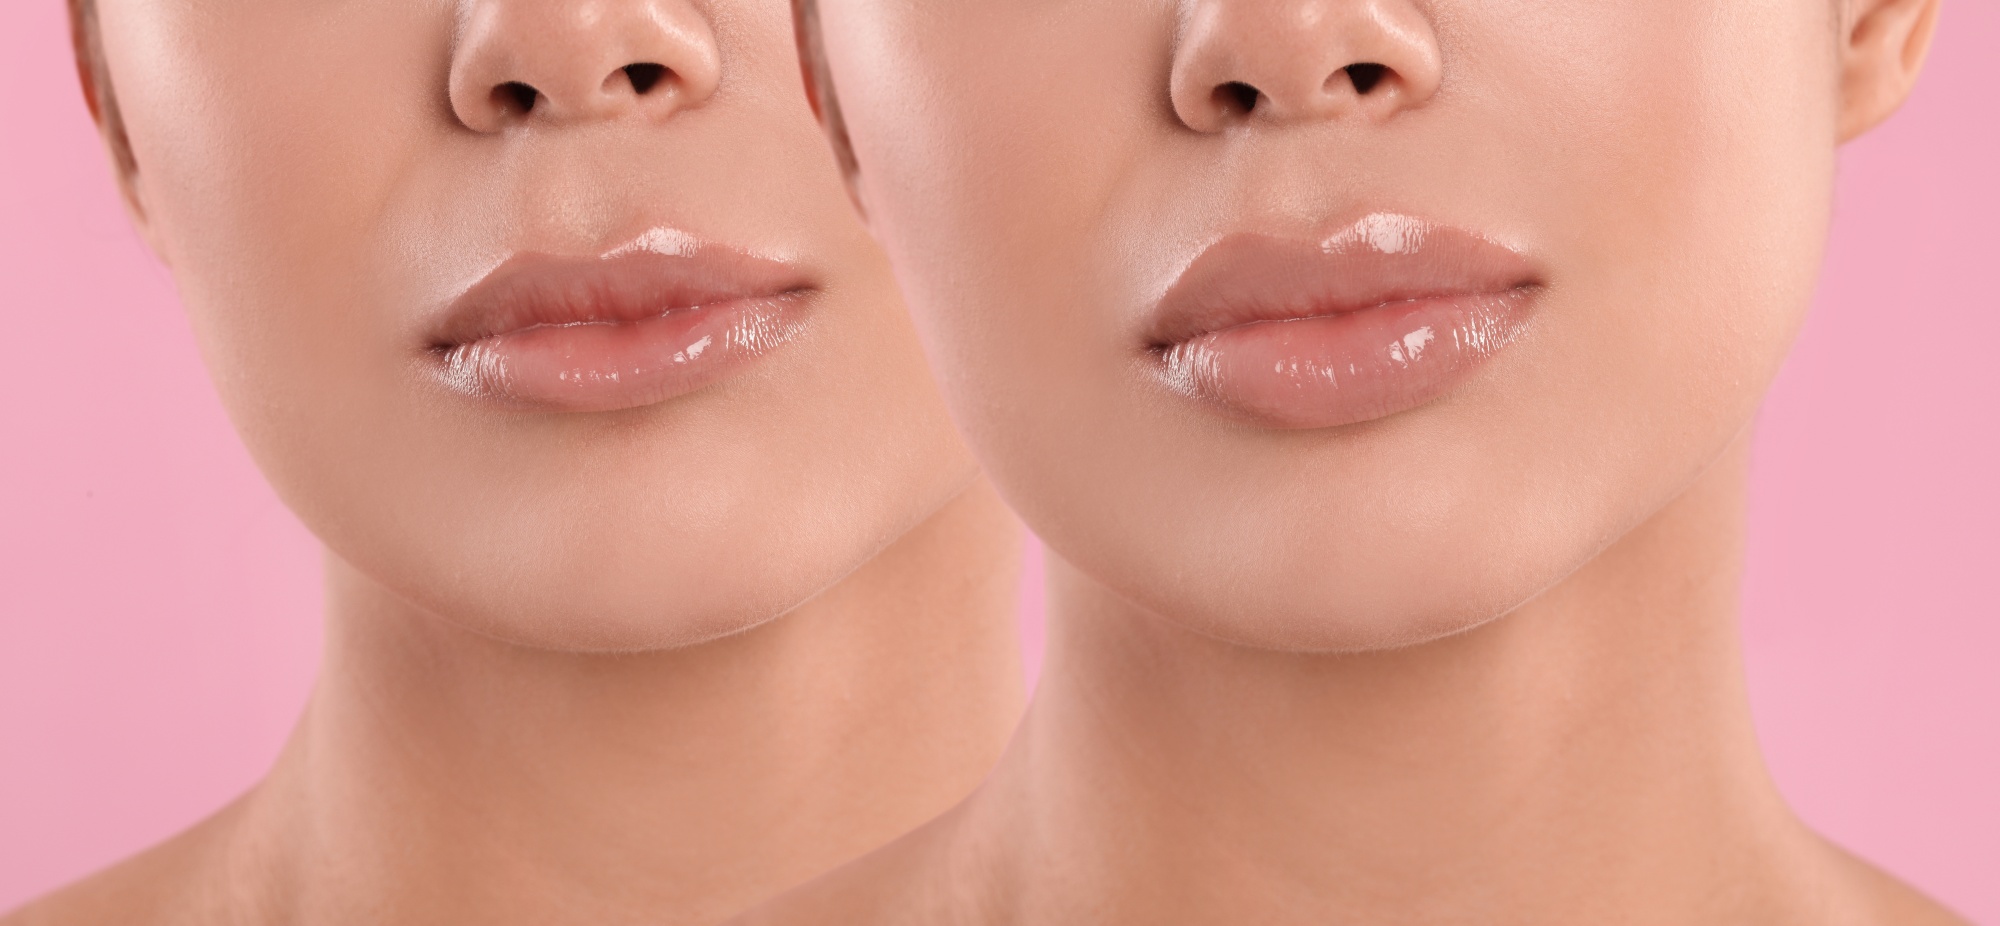 lip before and after procedure fuller more youthful lips